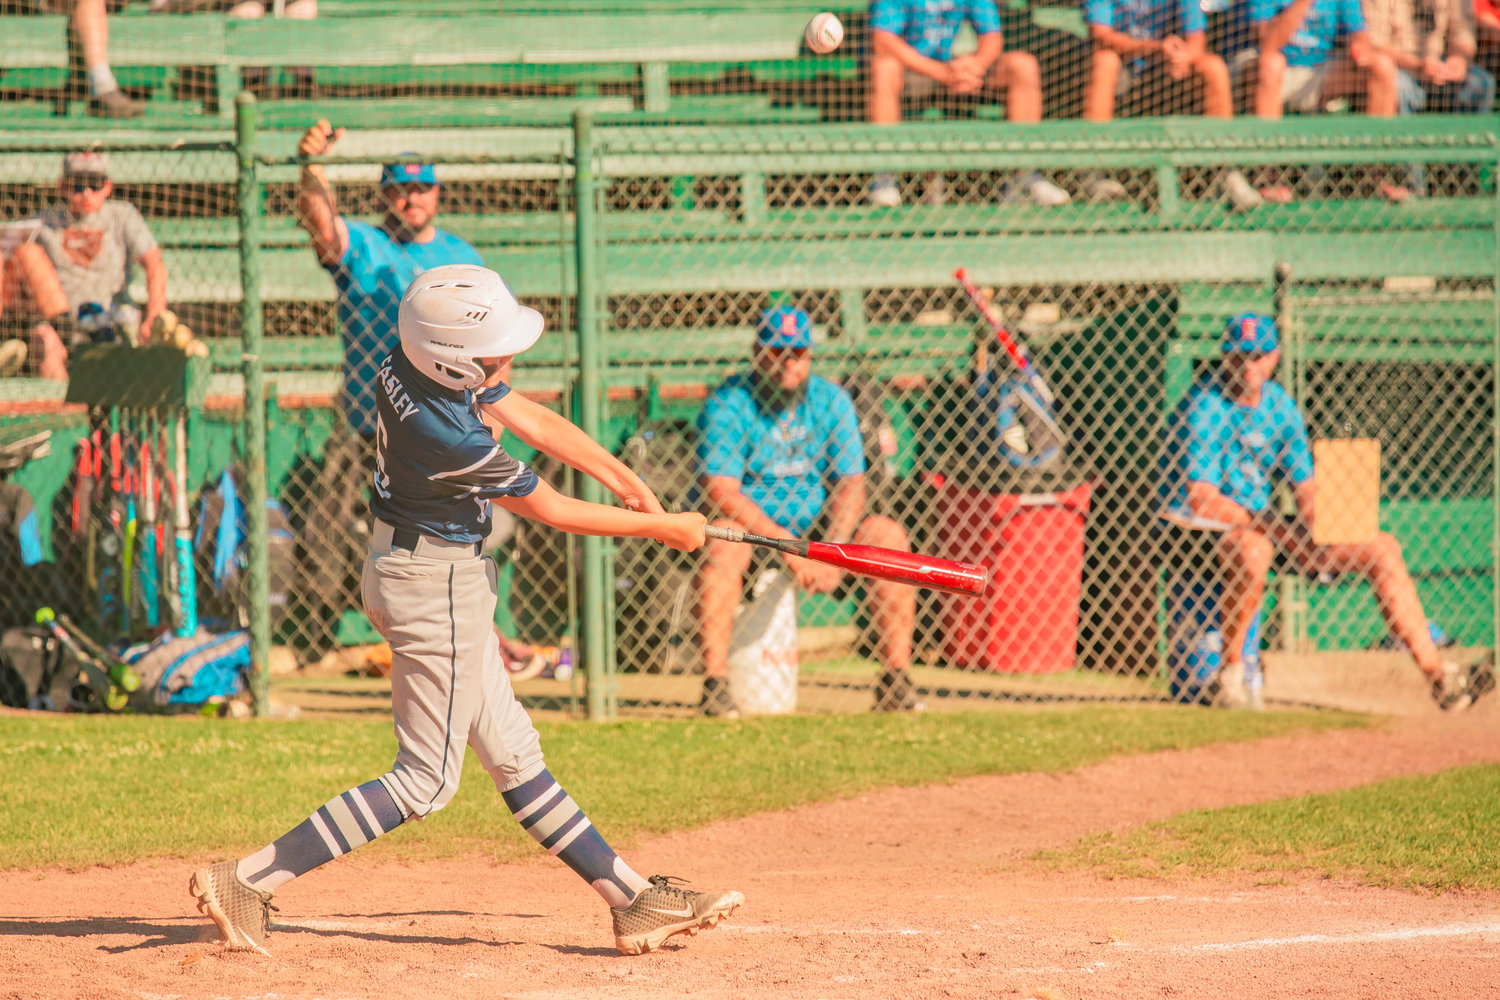 Larch Mountain’s Brody Easley (6) puts his bat on the ball during a game in Centralia at Dick Scott Field on Tuesday.